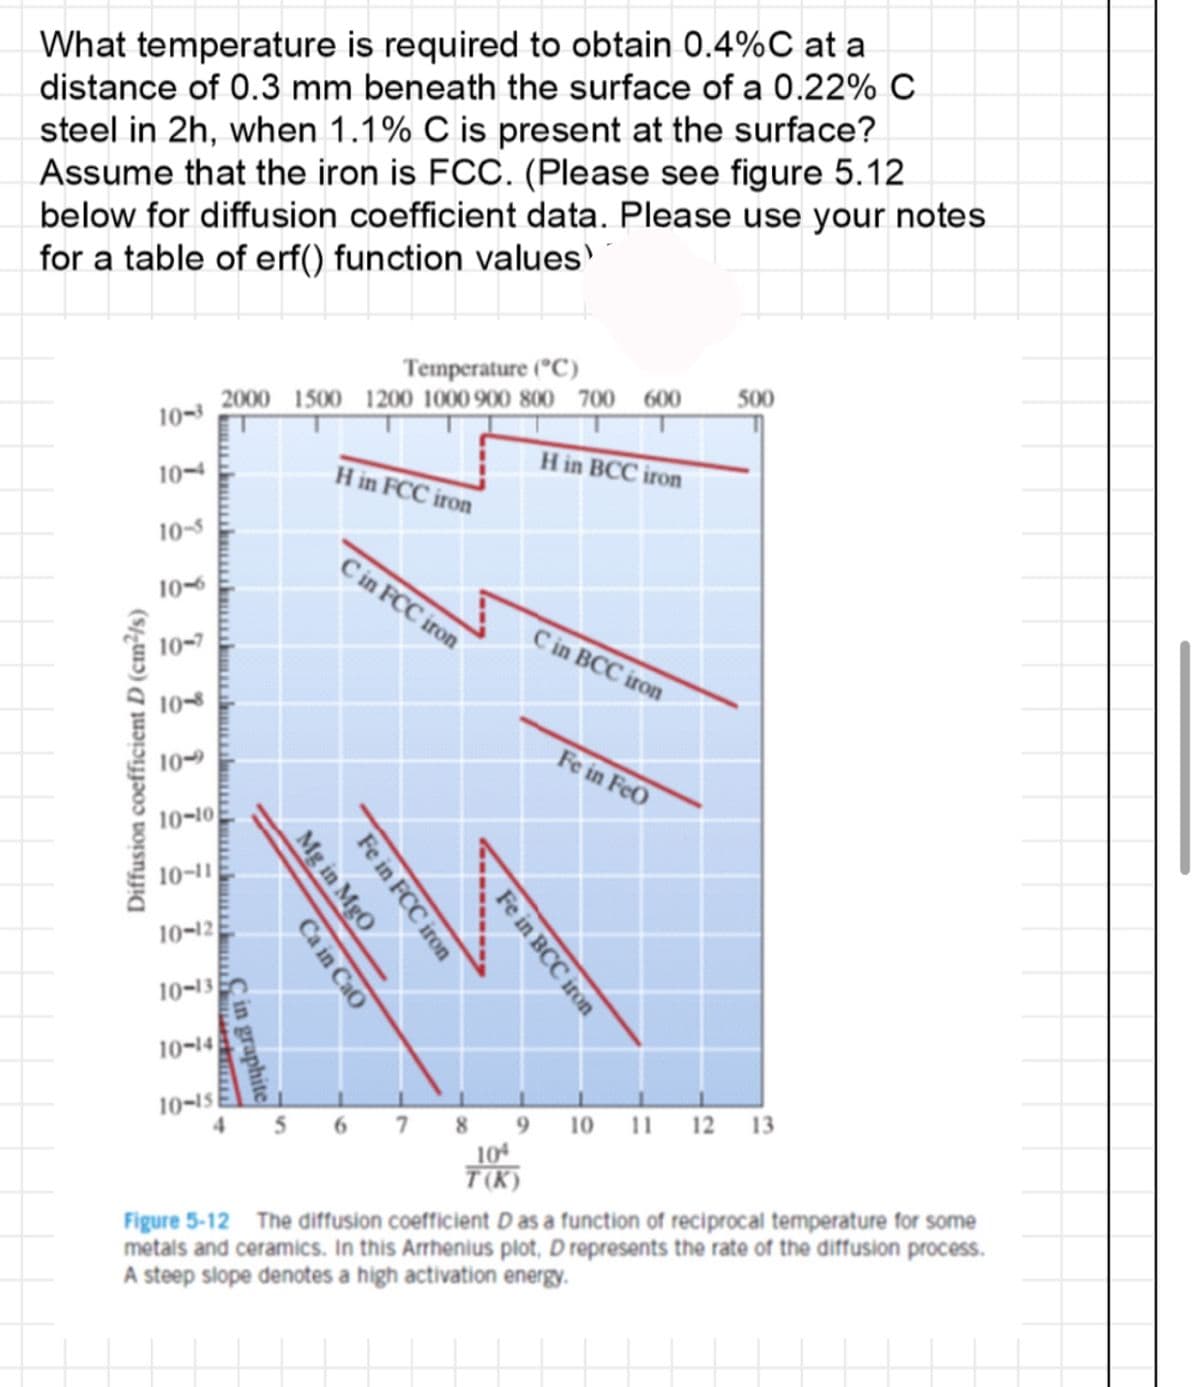 What temperature is required to obtain 0.4%C at a
distance of 0.3 mm beneath the surface of a 0.22% C
steel in 2h, when 1.1% C is present at the surface?
Assume that the iron is FCC. (Please see figure 5.12
below for diffusion coefficient data. Please use your notes
for a table of erf() function values
Diffusion coefficient D (cm²/s)
ܐ
ܐ
ܐ
ܐ
10-
10-5
10-
10-10
10-11
10-12
10-13
10-14
10-15
Temperature (°C)
2000 1500 1200 1000 900 800 700 600
Cin graphite
Mg in MgO
Ca in Cao
H in FCC iron
C in FCC iron
Fe in FCC iron
Fe in BCC iron
H in BCC iron
C in BCC iron
Fe in FeO
500
5 6 7 8 9 10 11 12 13
104
T(K)
Figure 5-12 The diffusion coefficient D as a function of reciprocal temperature for some
metals and ceramics. In this Arrhenius plot, D represents the rate of the diffusion process.
A steep slope denotes a high activation energy.